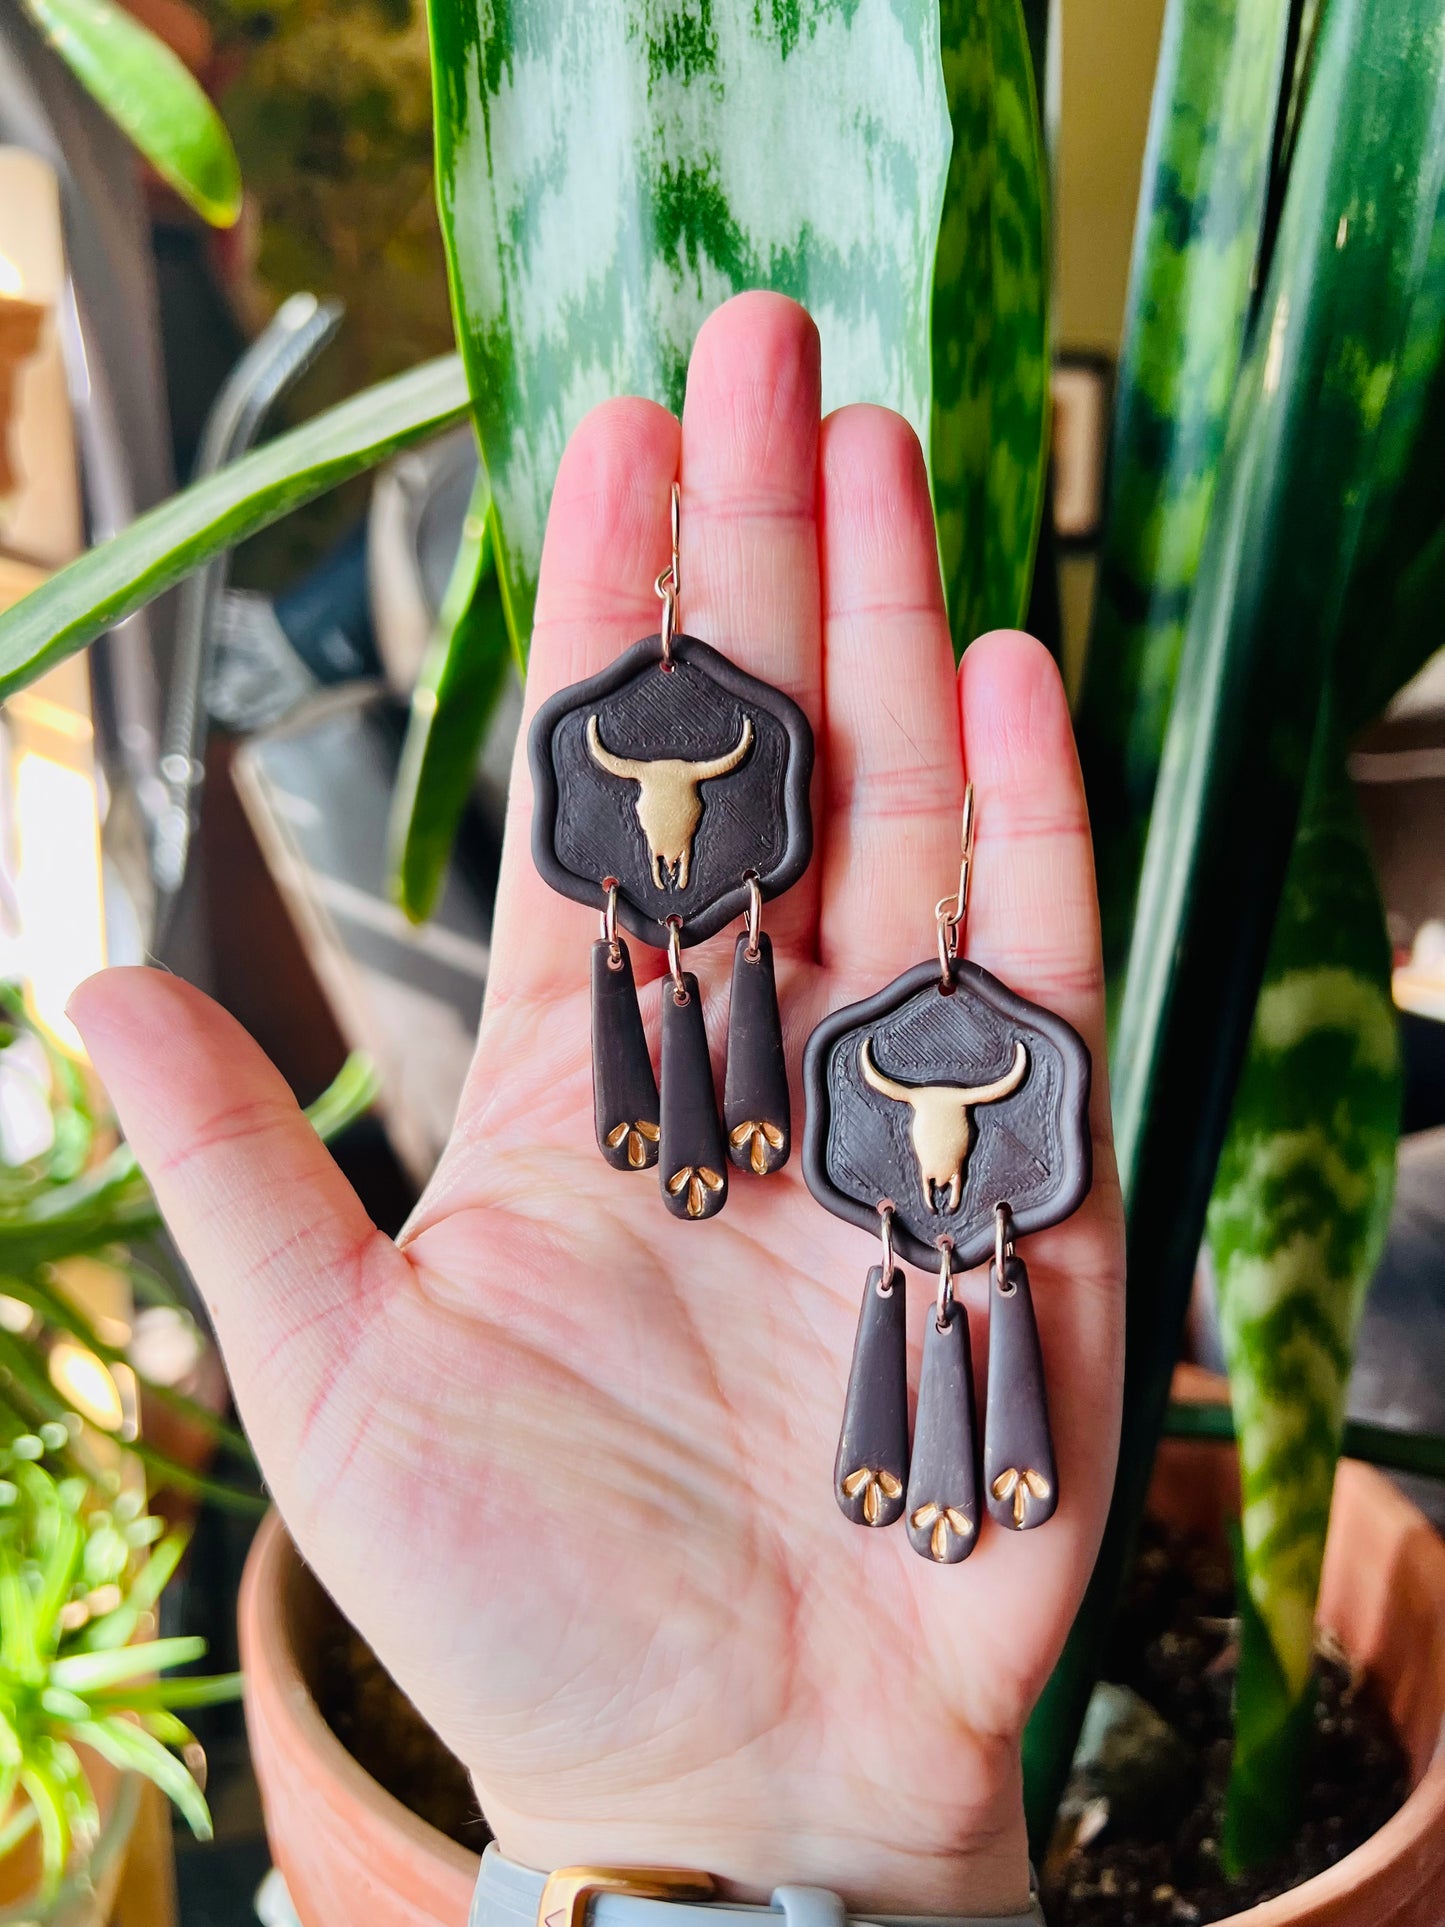 Complete your cowgirl ensemble with our metallic gold longhorn skull earrings, featuring deep brown accents for a touch of western flair. These statement earrings are perfect for adding rustic charm to any outfit.